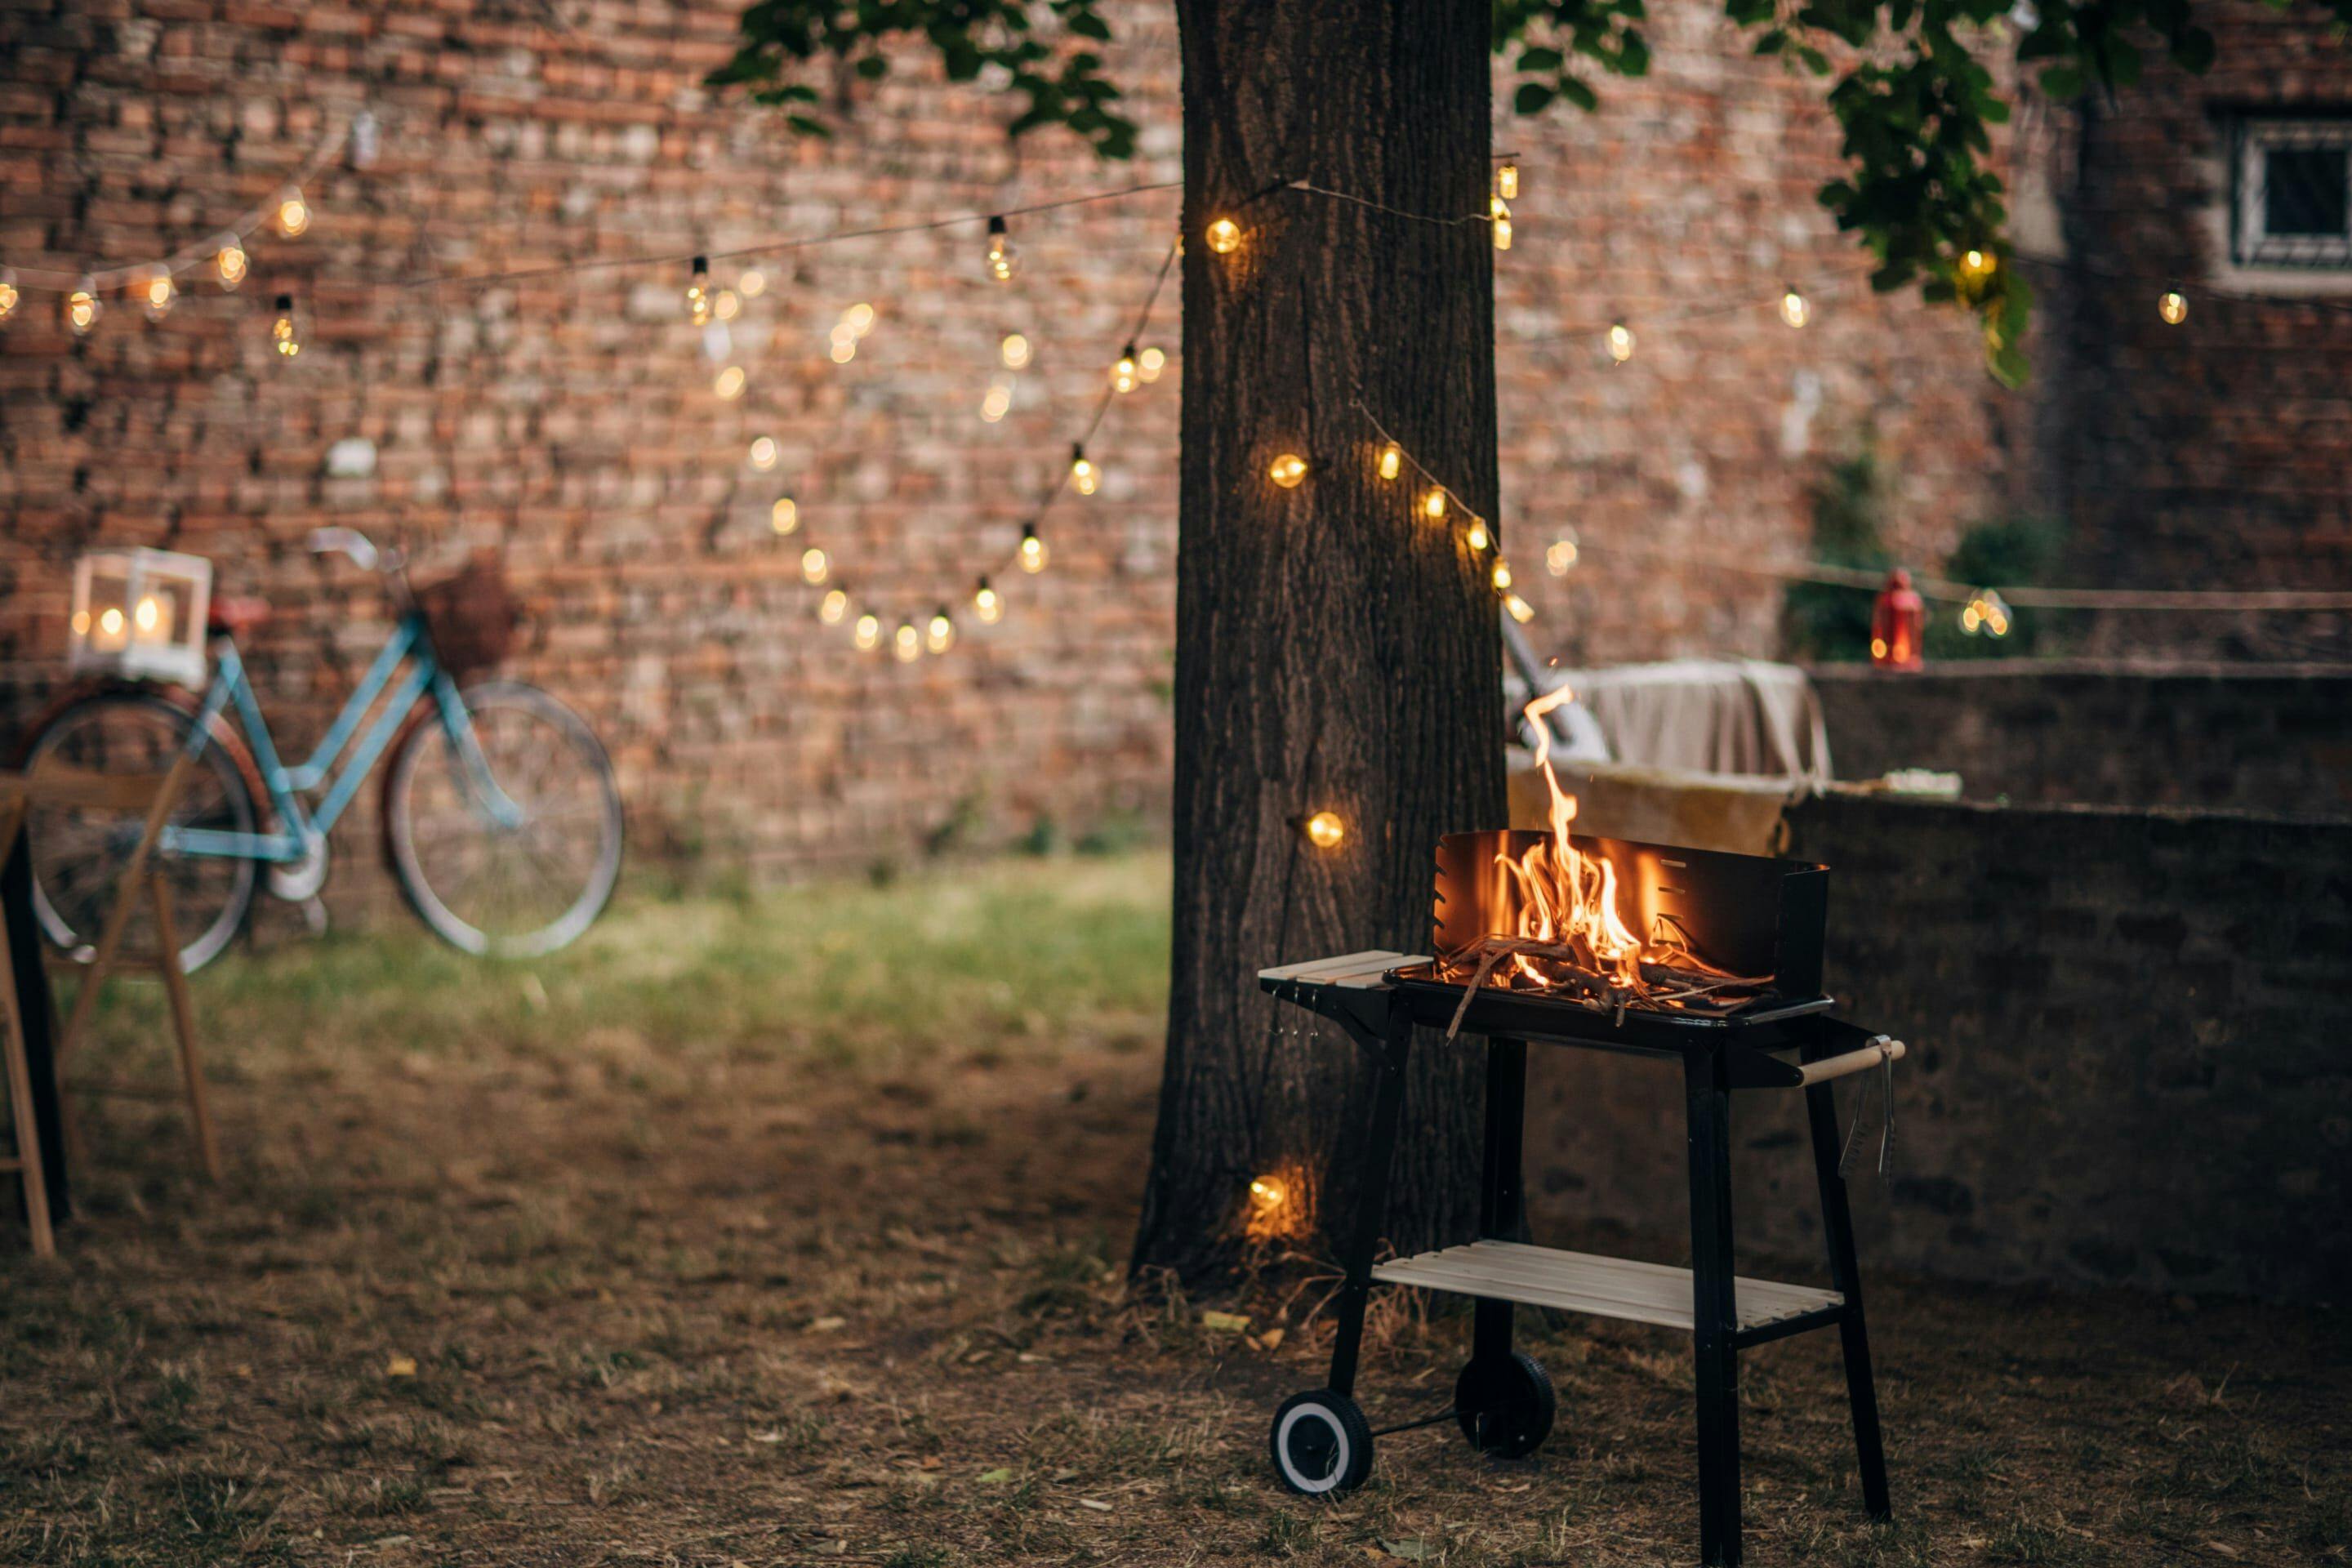 Decorate your BBQ evening to set the mood.